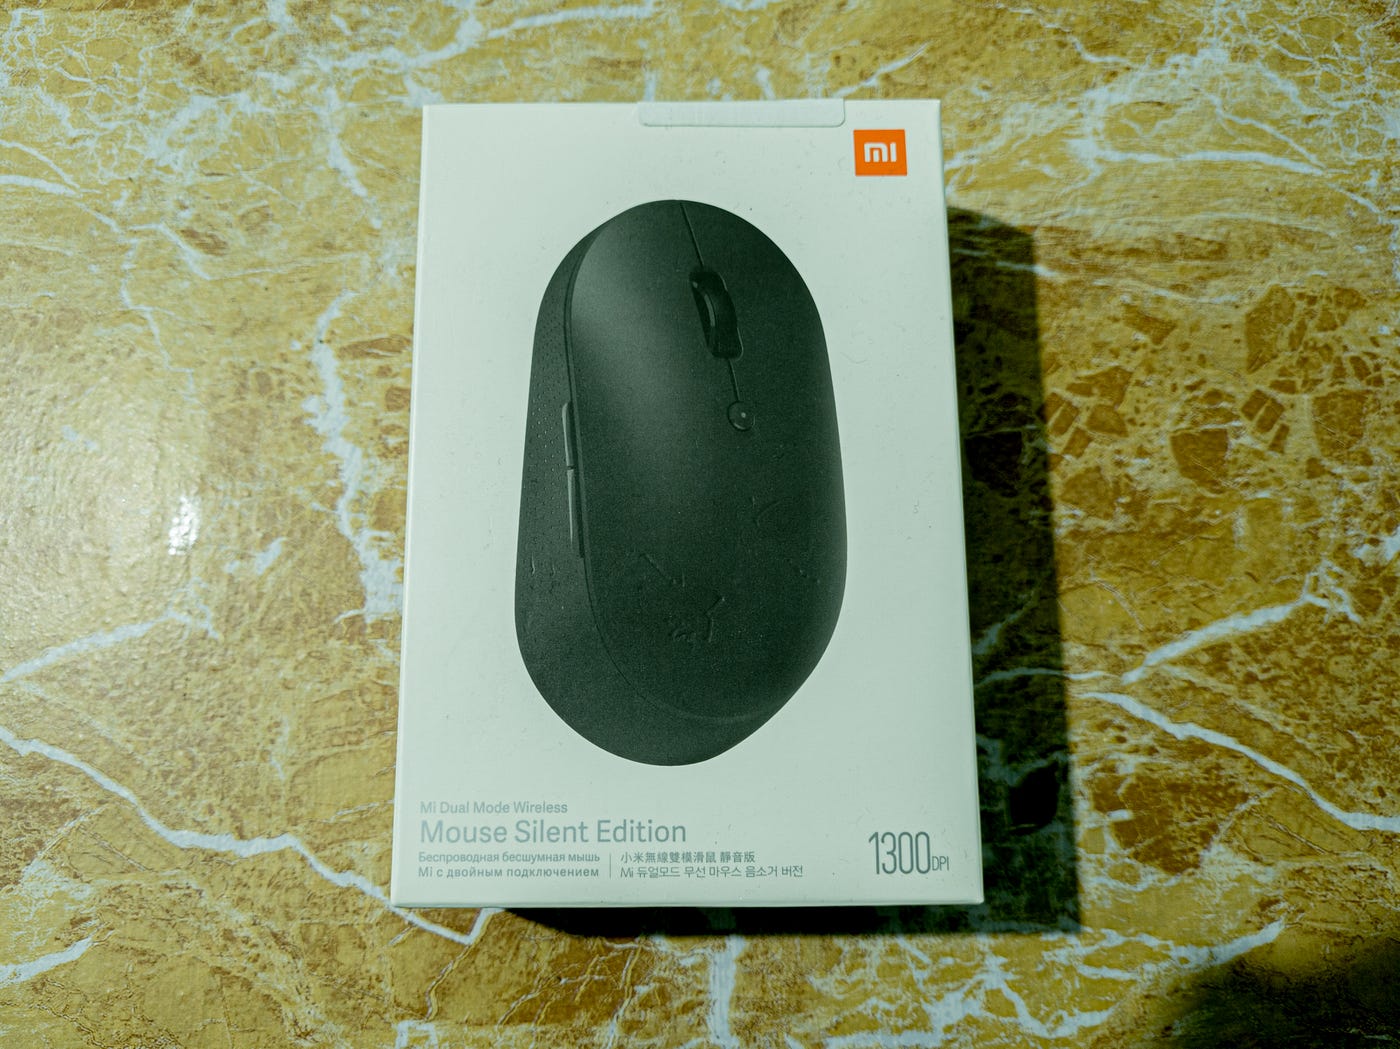 The Best Value Bluetooth Mouse (15$): Xiaomi Mouse Silent Edition, by  Otmane Fettal